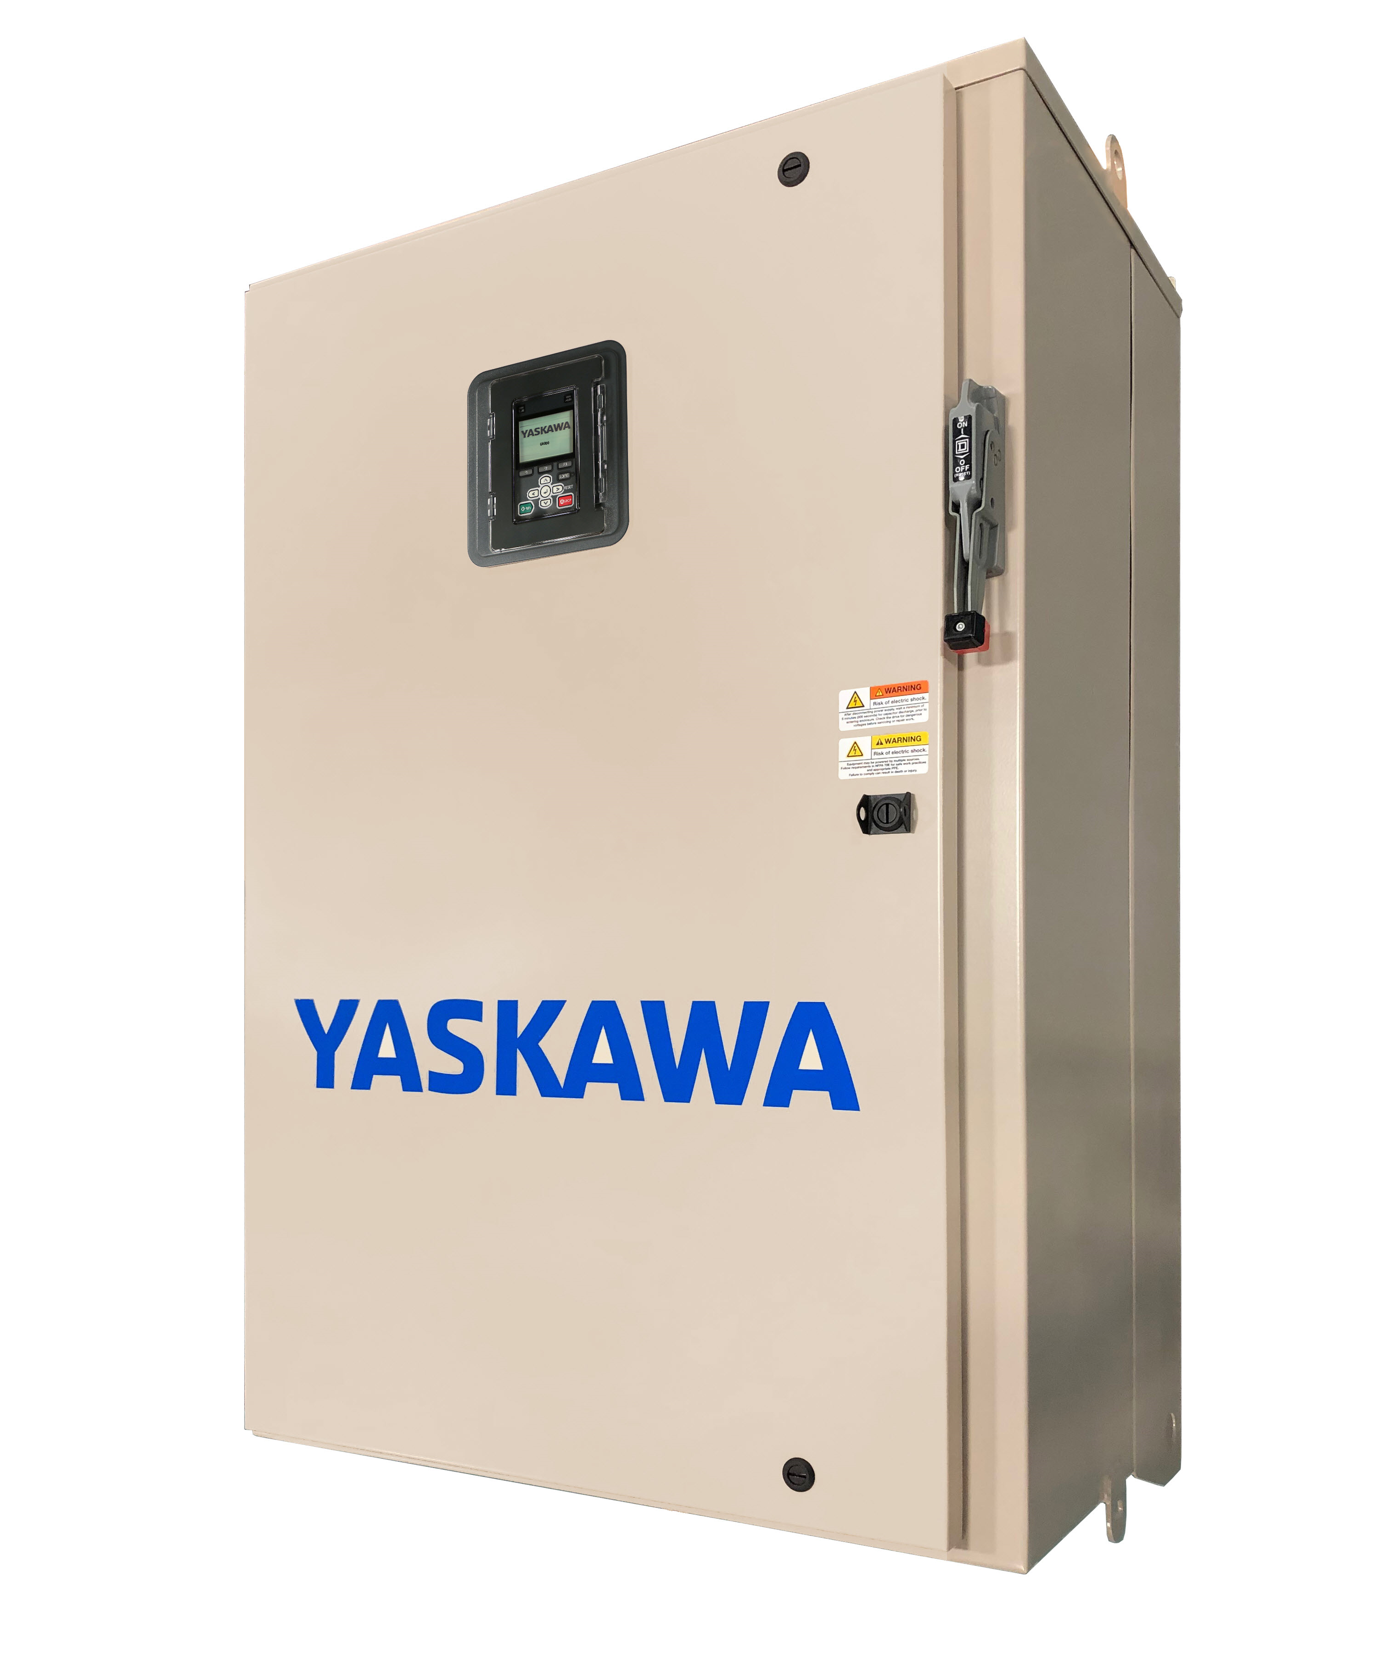 Yaskawa Packaged Variable Frequency Drives